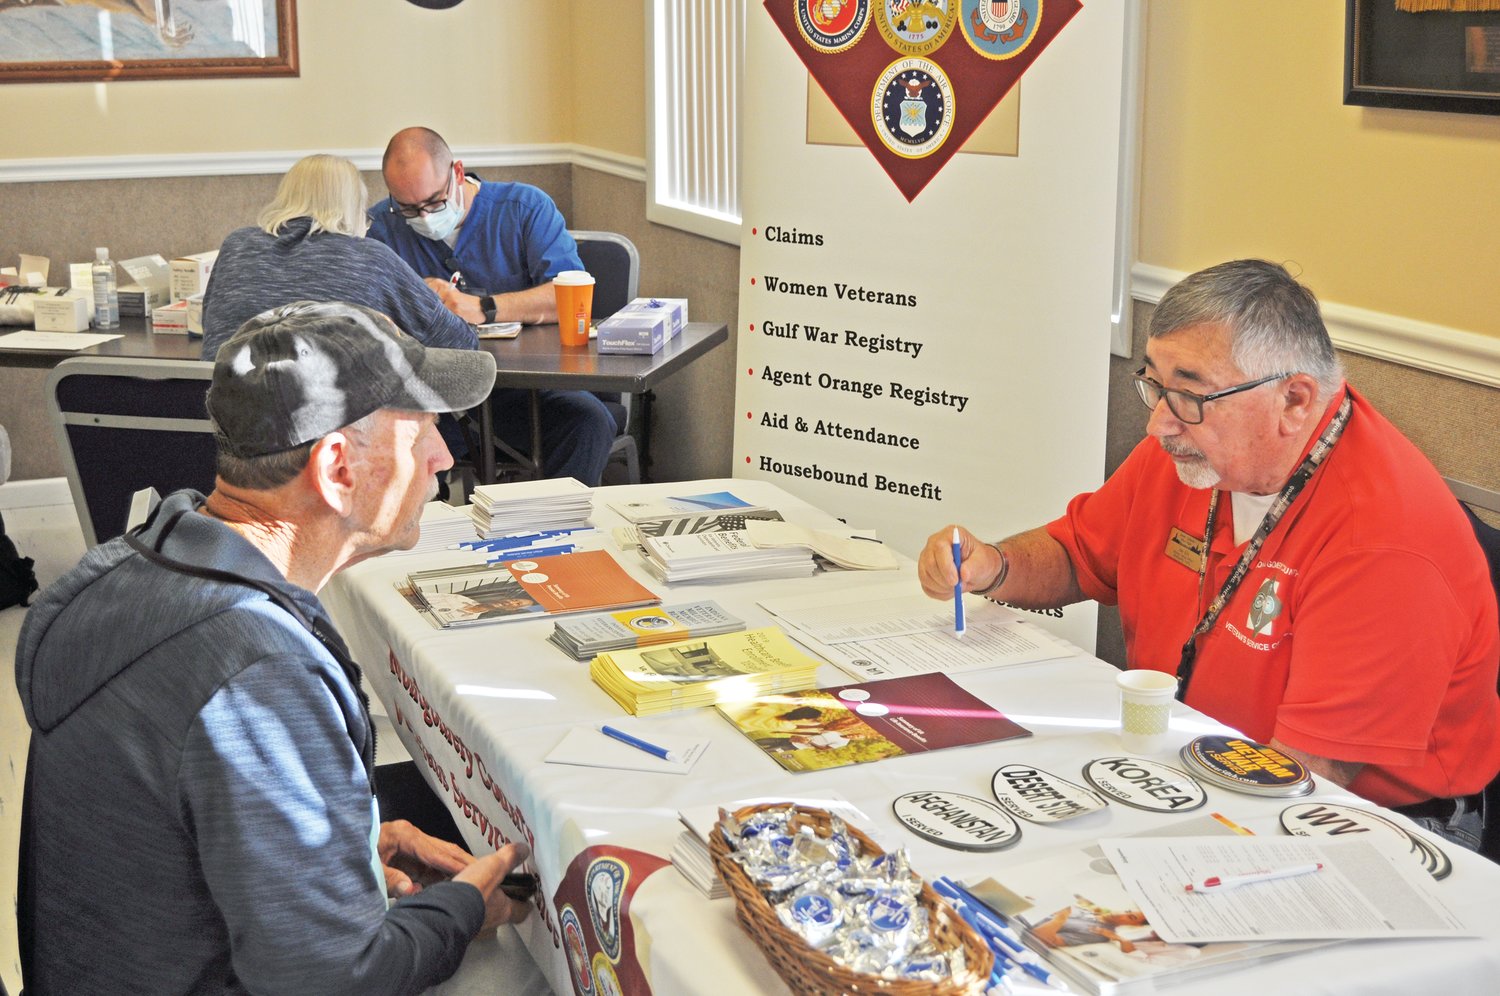 Joe Ellis, Montgomery County Veterans Service Officer, consults with a veteran at last year's Veterans Expo at Crawfordsville American Legion Byron Cox Post 72.